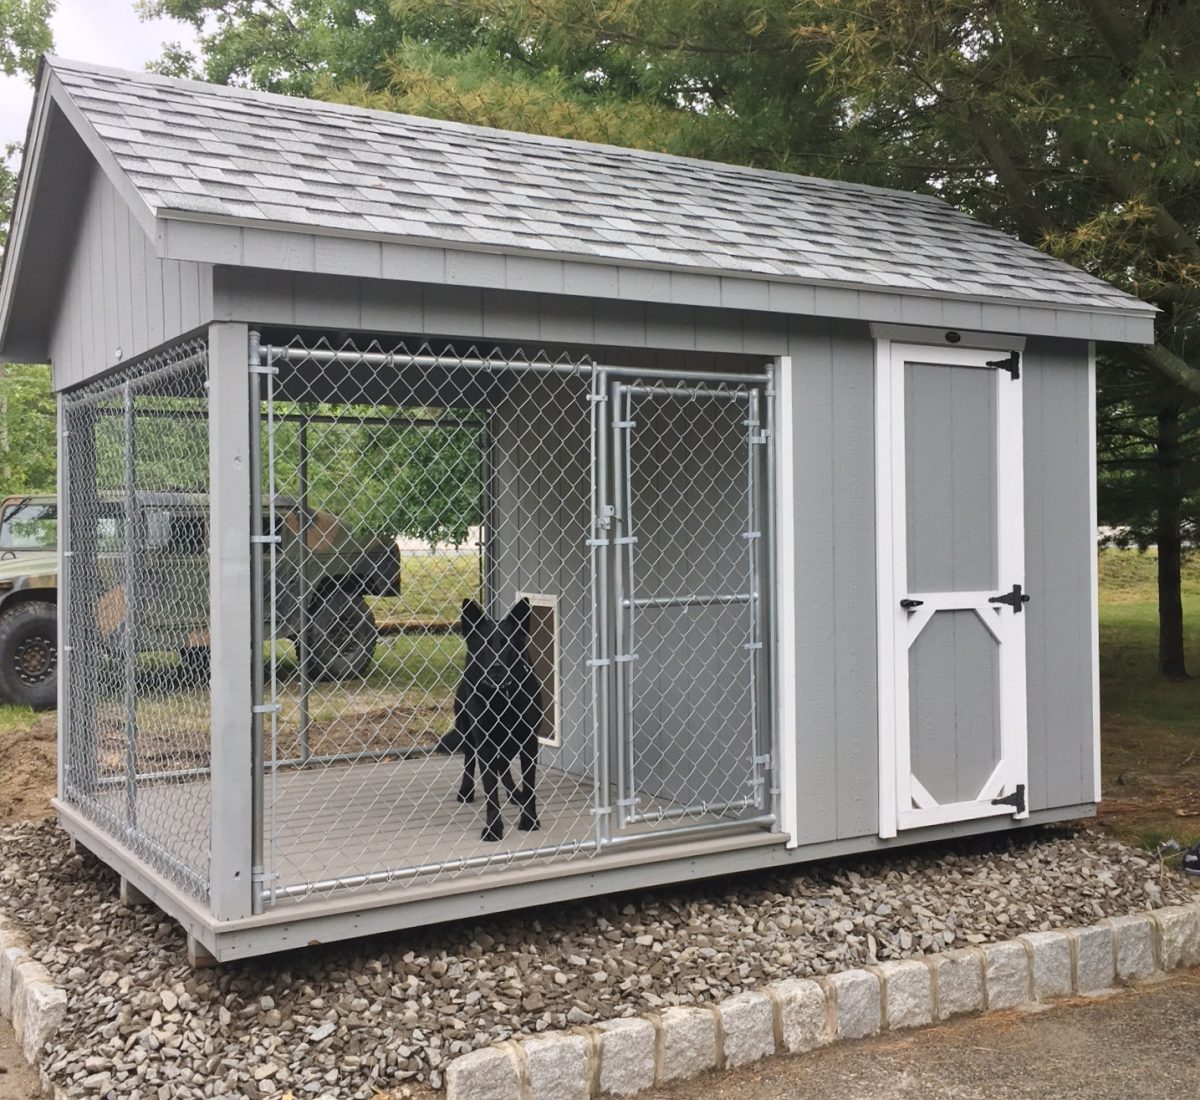 Police Foundation Donations Fund Purchase of K-9 Kennel.